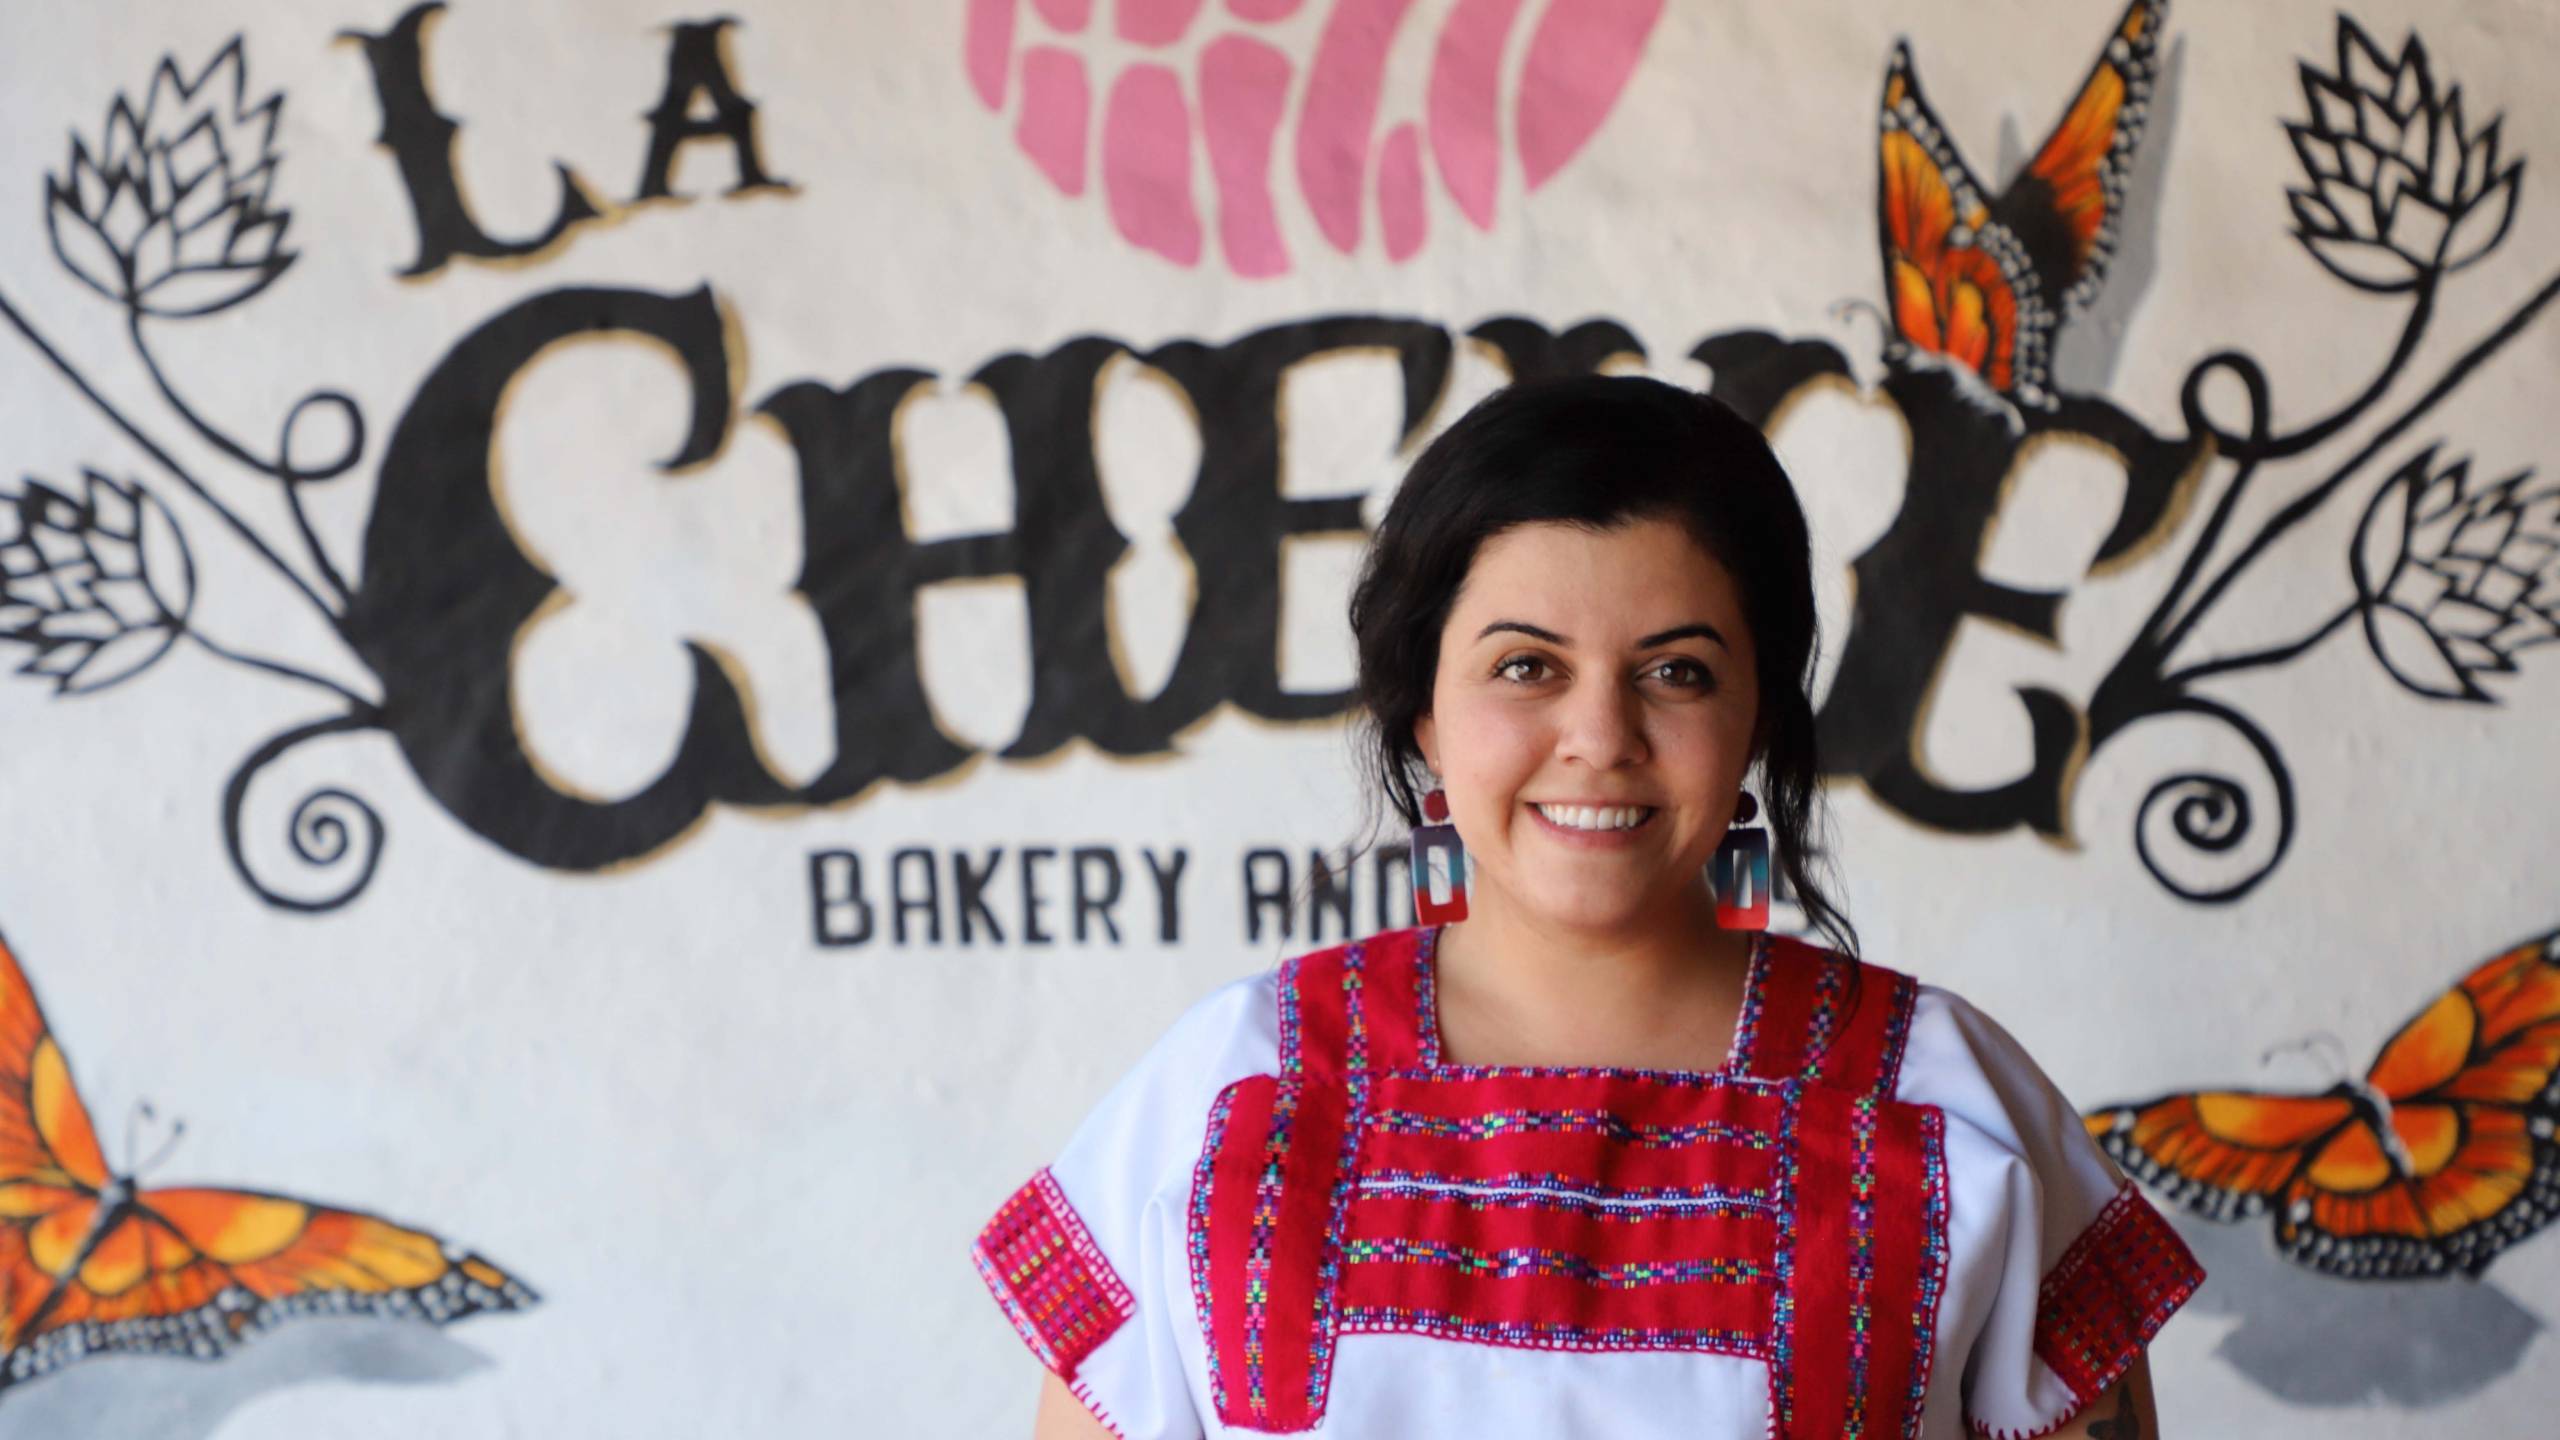 Cinthya Cisneros poses in front of the sign for her Napa restaurant La Cheve.